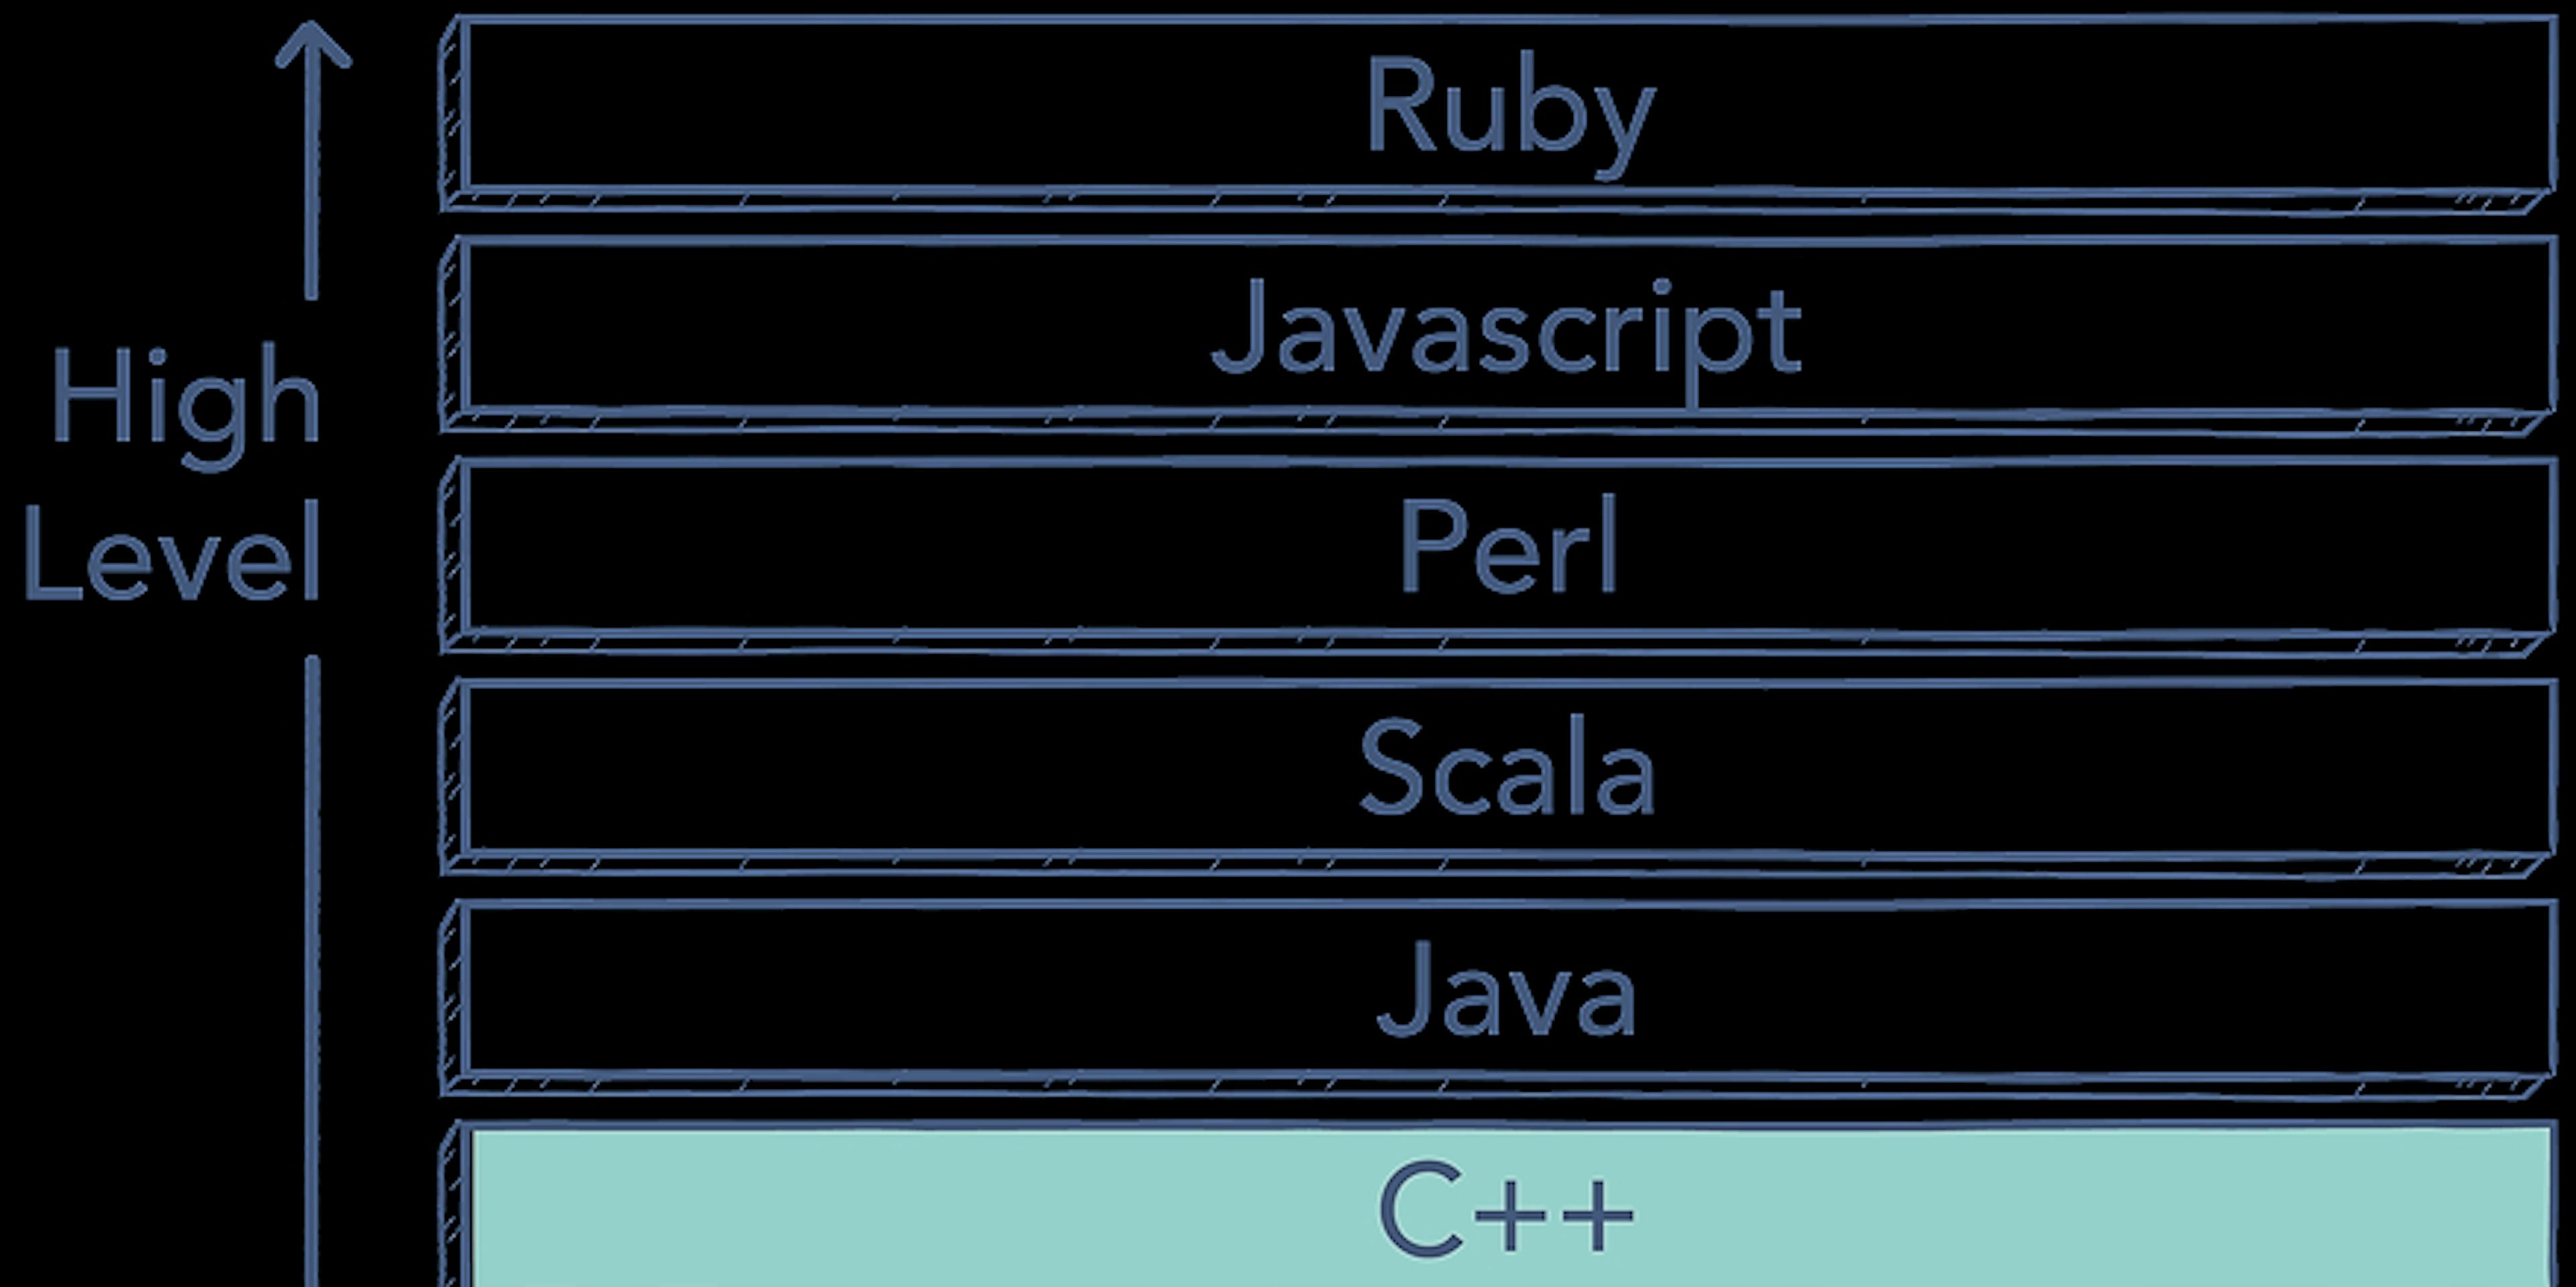 /top-10-popular-programming-languages-and-their-creators-java-ruby-python-c-javascript-php-f52e28618e4f feature image